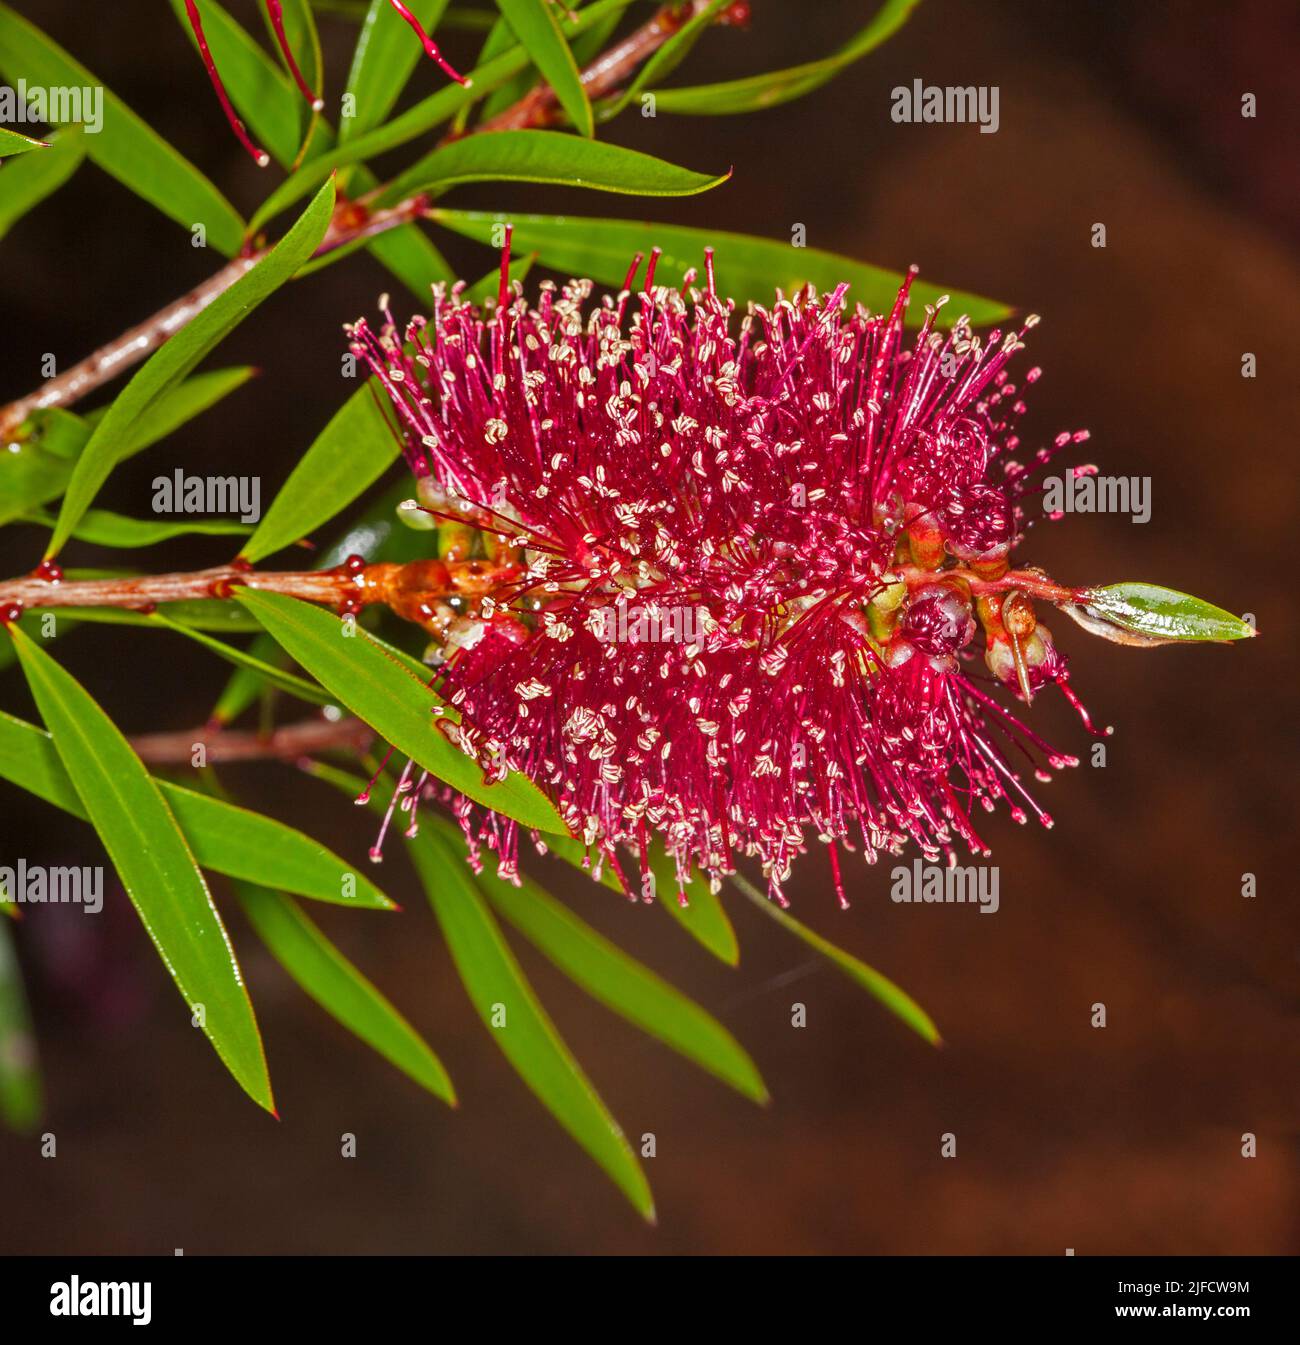 Dark red flower and green foliage of Callistemon 'Great Lakes', a bottlebrush, Australian native plant, on brown background Stock Photo